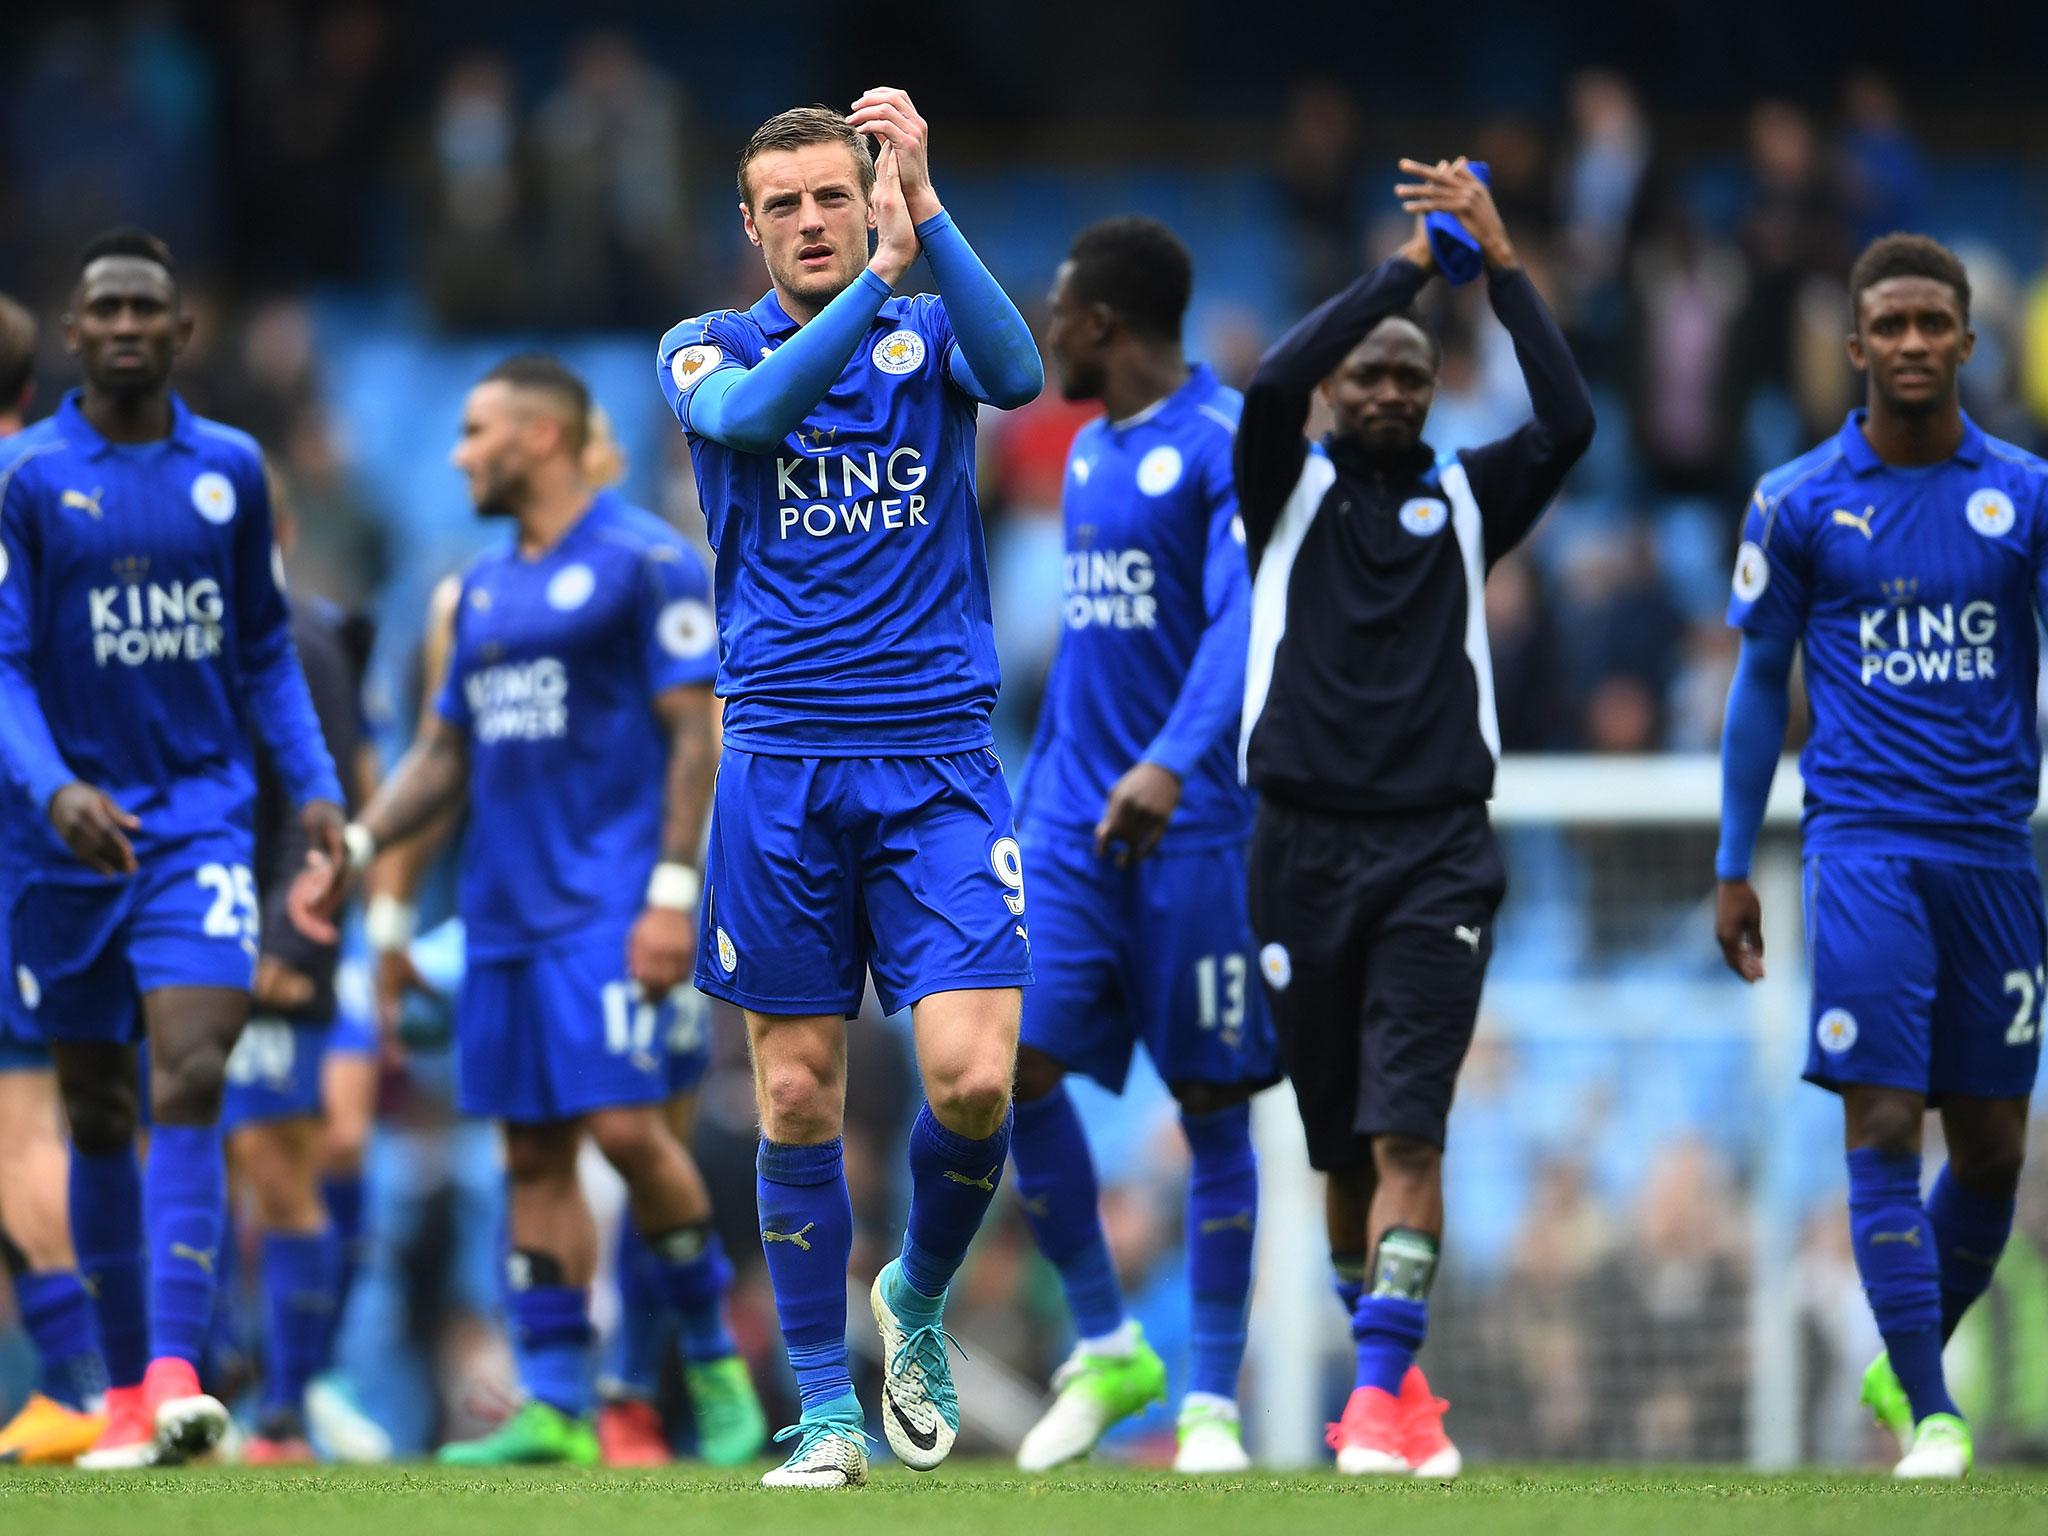 Leicester will be looking to build upon the success of the last two seasons